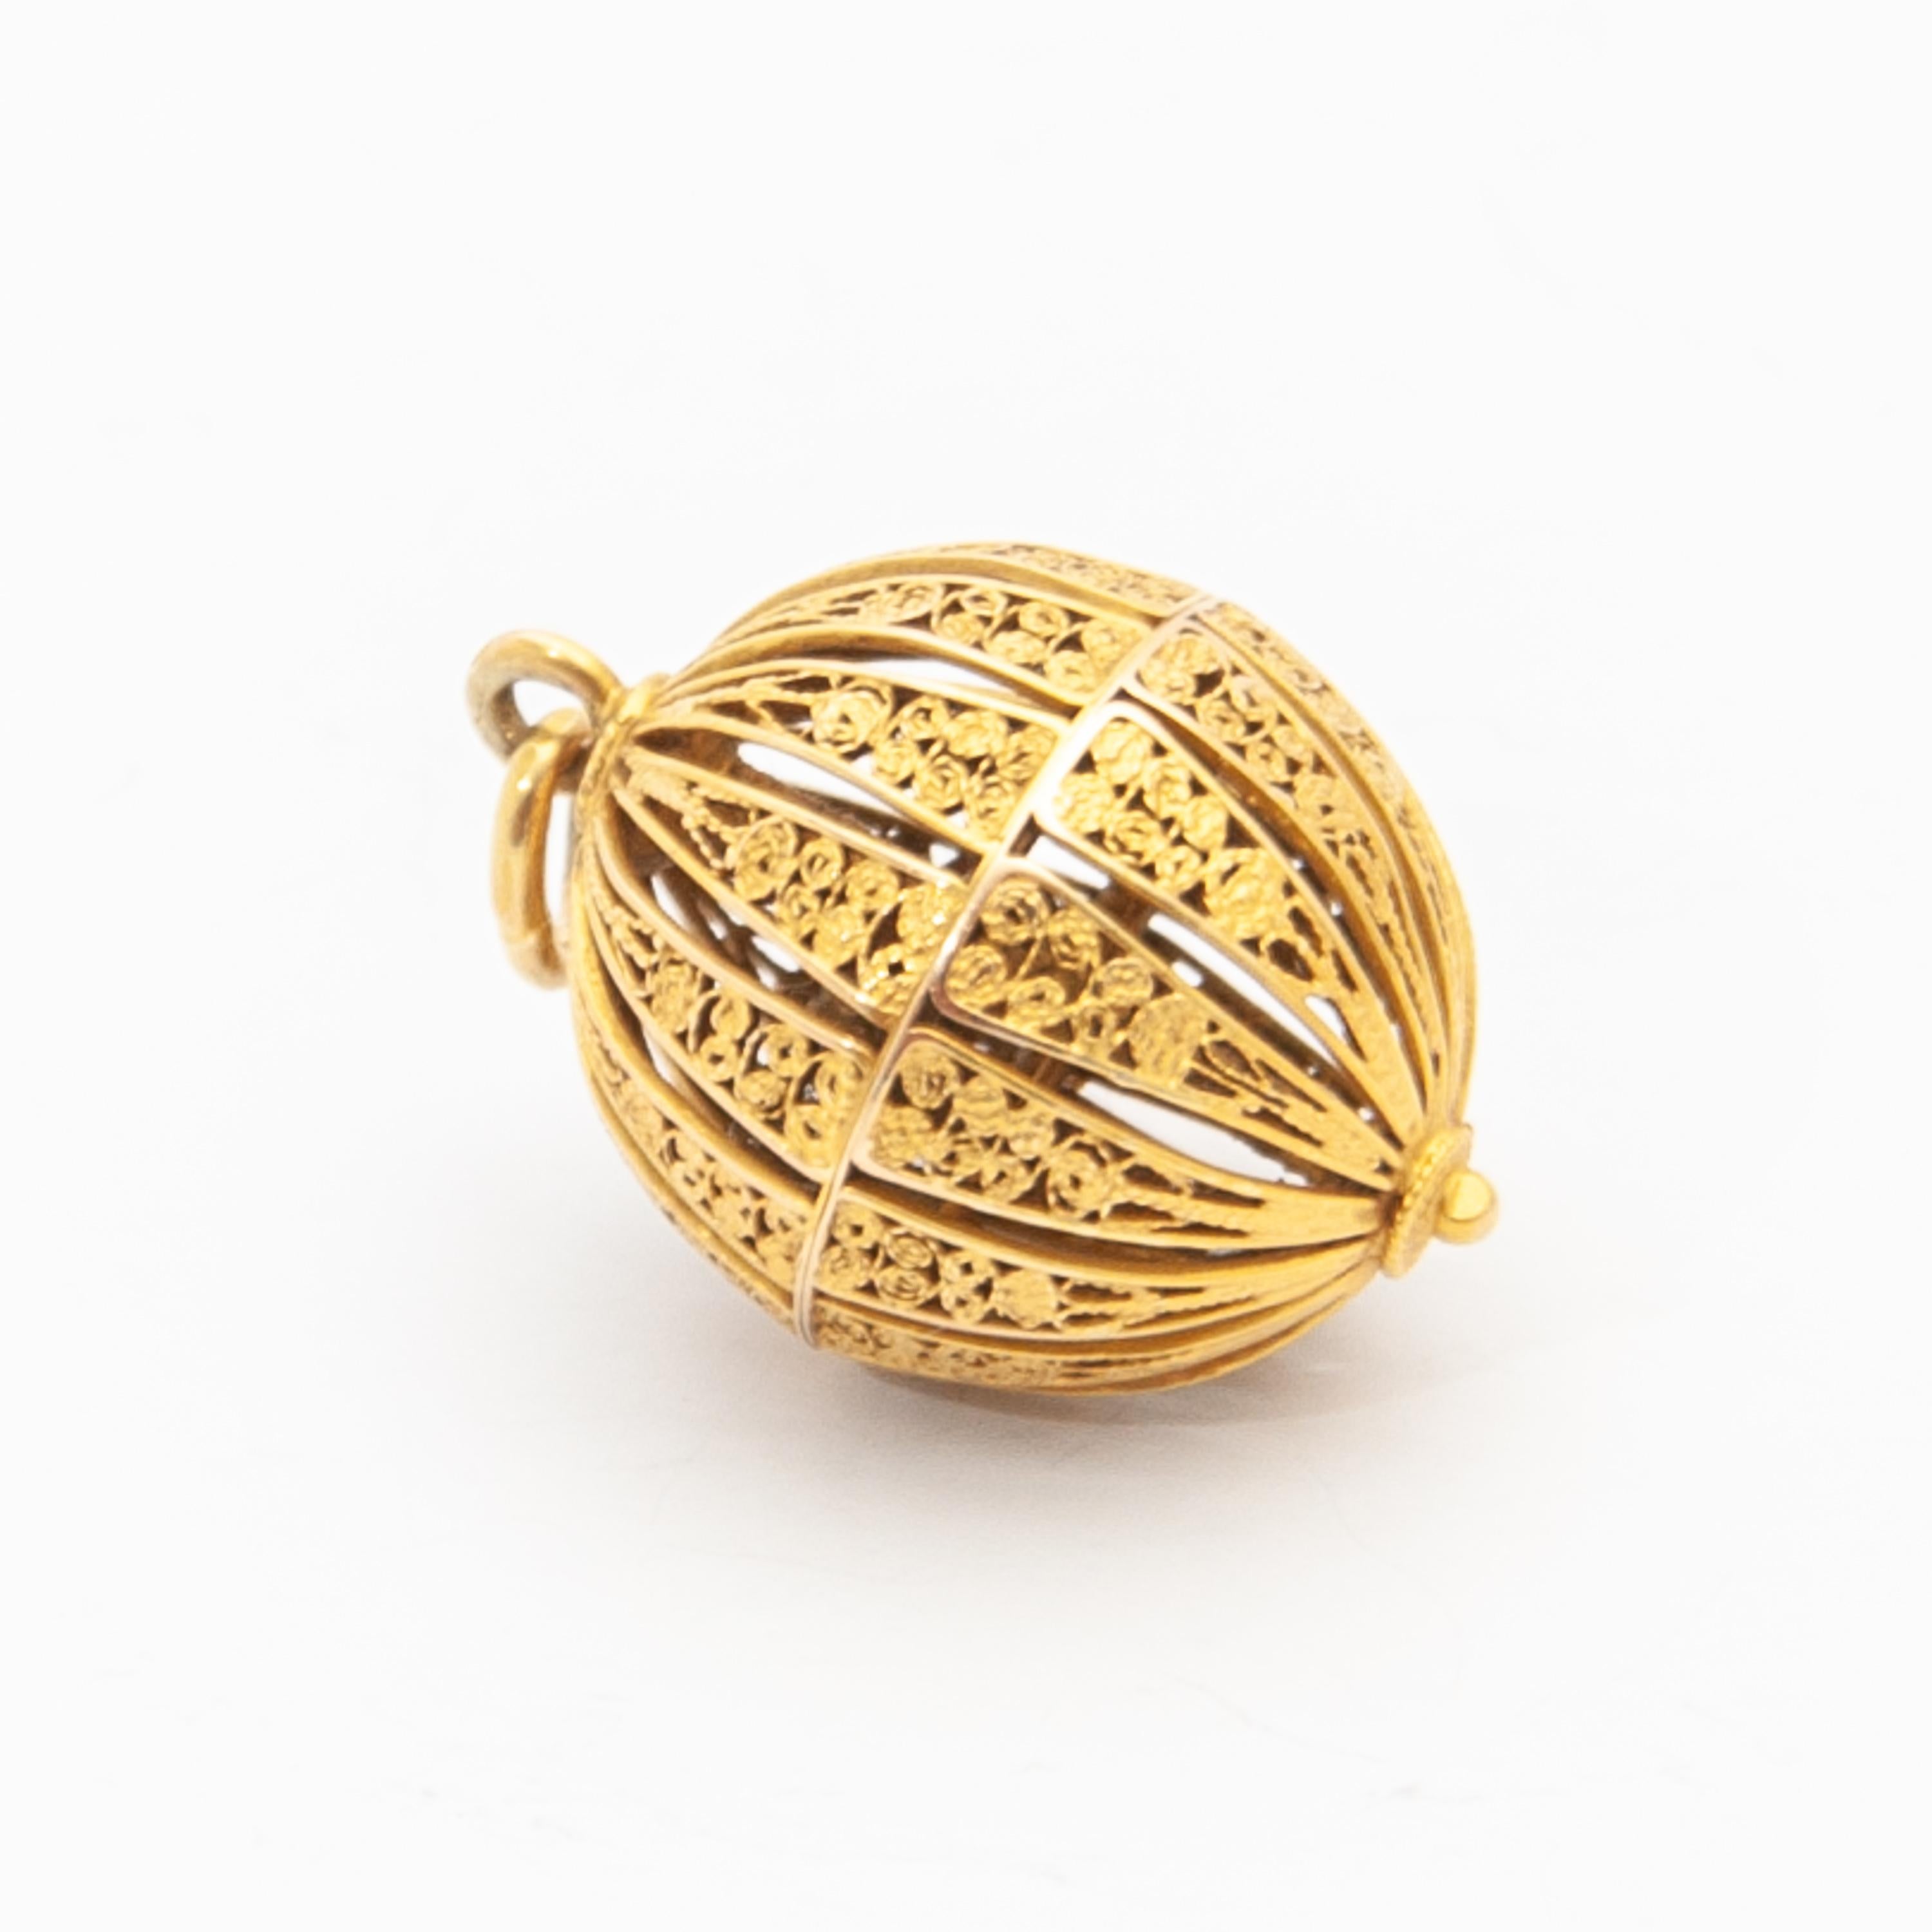 This filigree pomander pendant is crafted in 14 karat yellow gold. The lovely vinaigrette pomander is round-shaped and has an openwork design of fine filigree work. This filigree globule has a screw fitting - by unscrewing the top and bottom can be